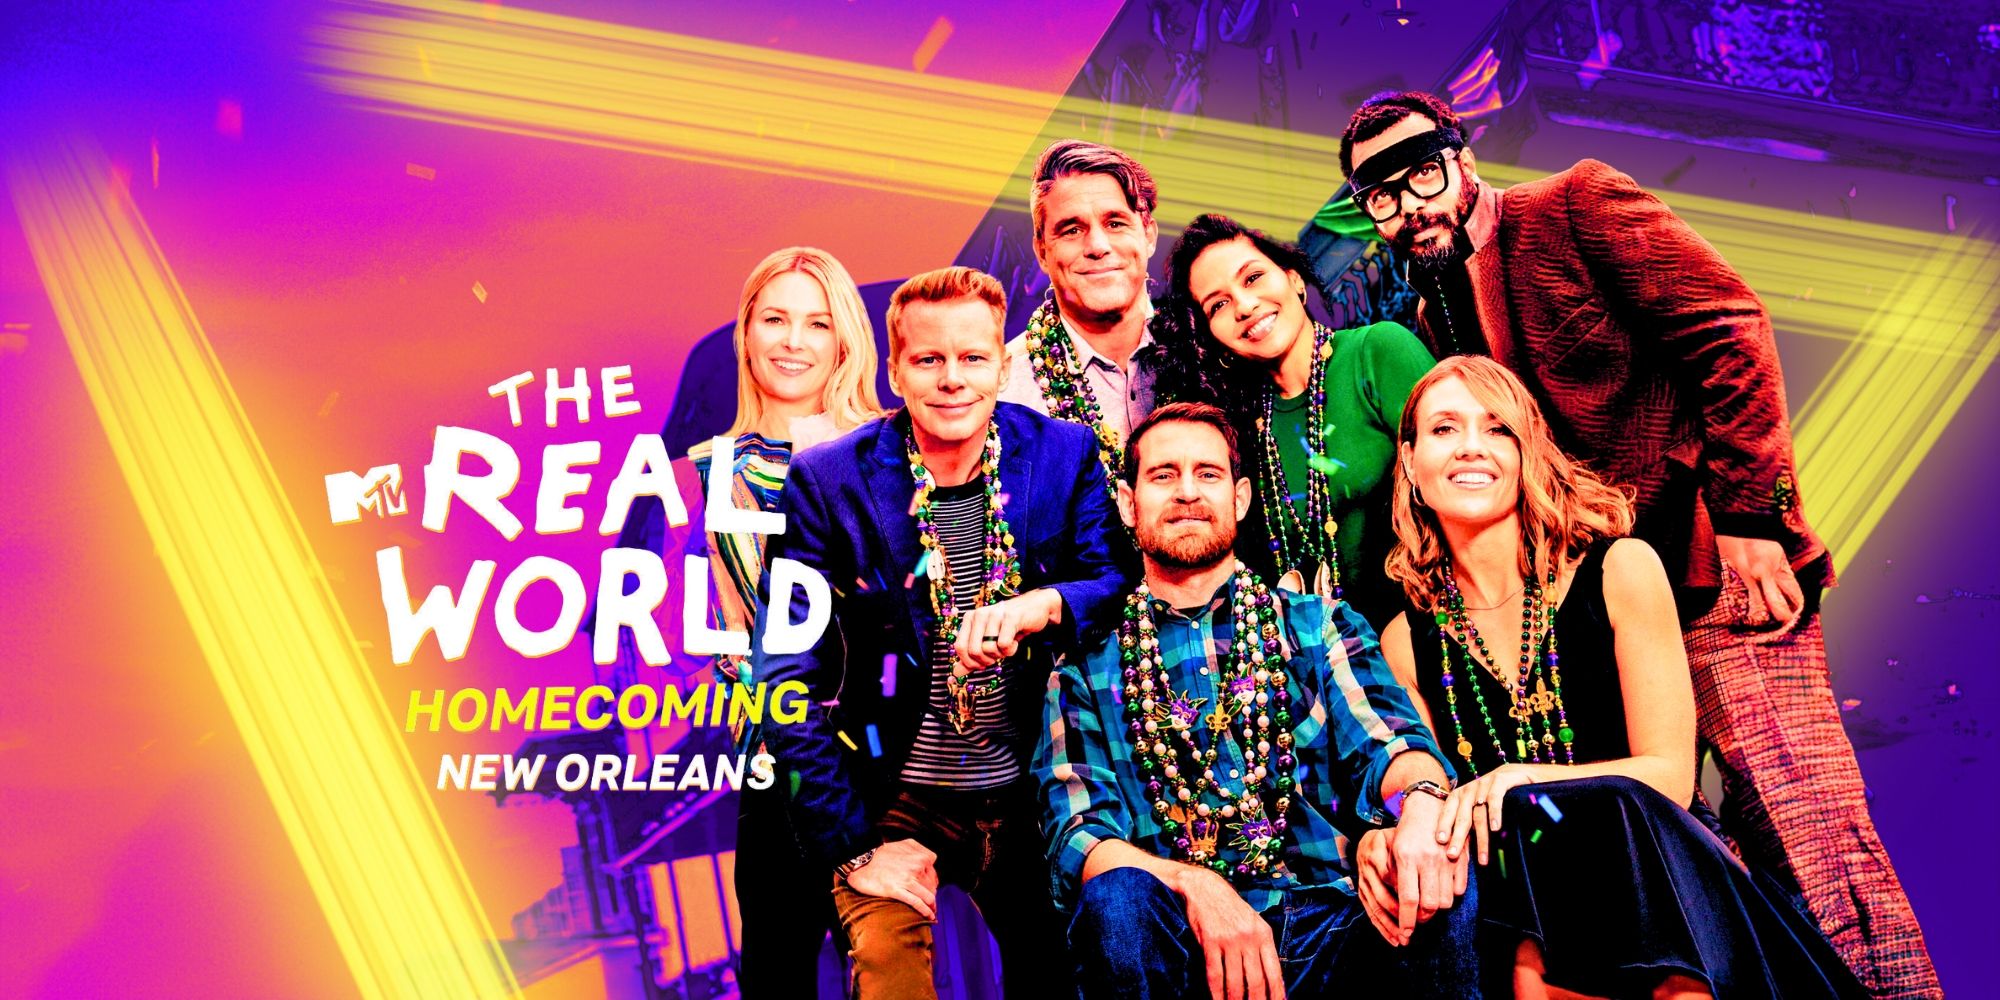 The Real World New Orleans Homecoming cast posing for promo pic with show logo